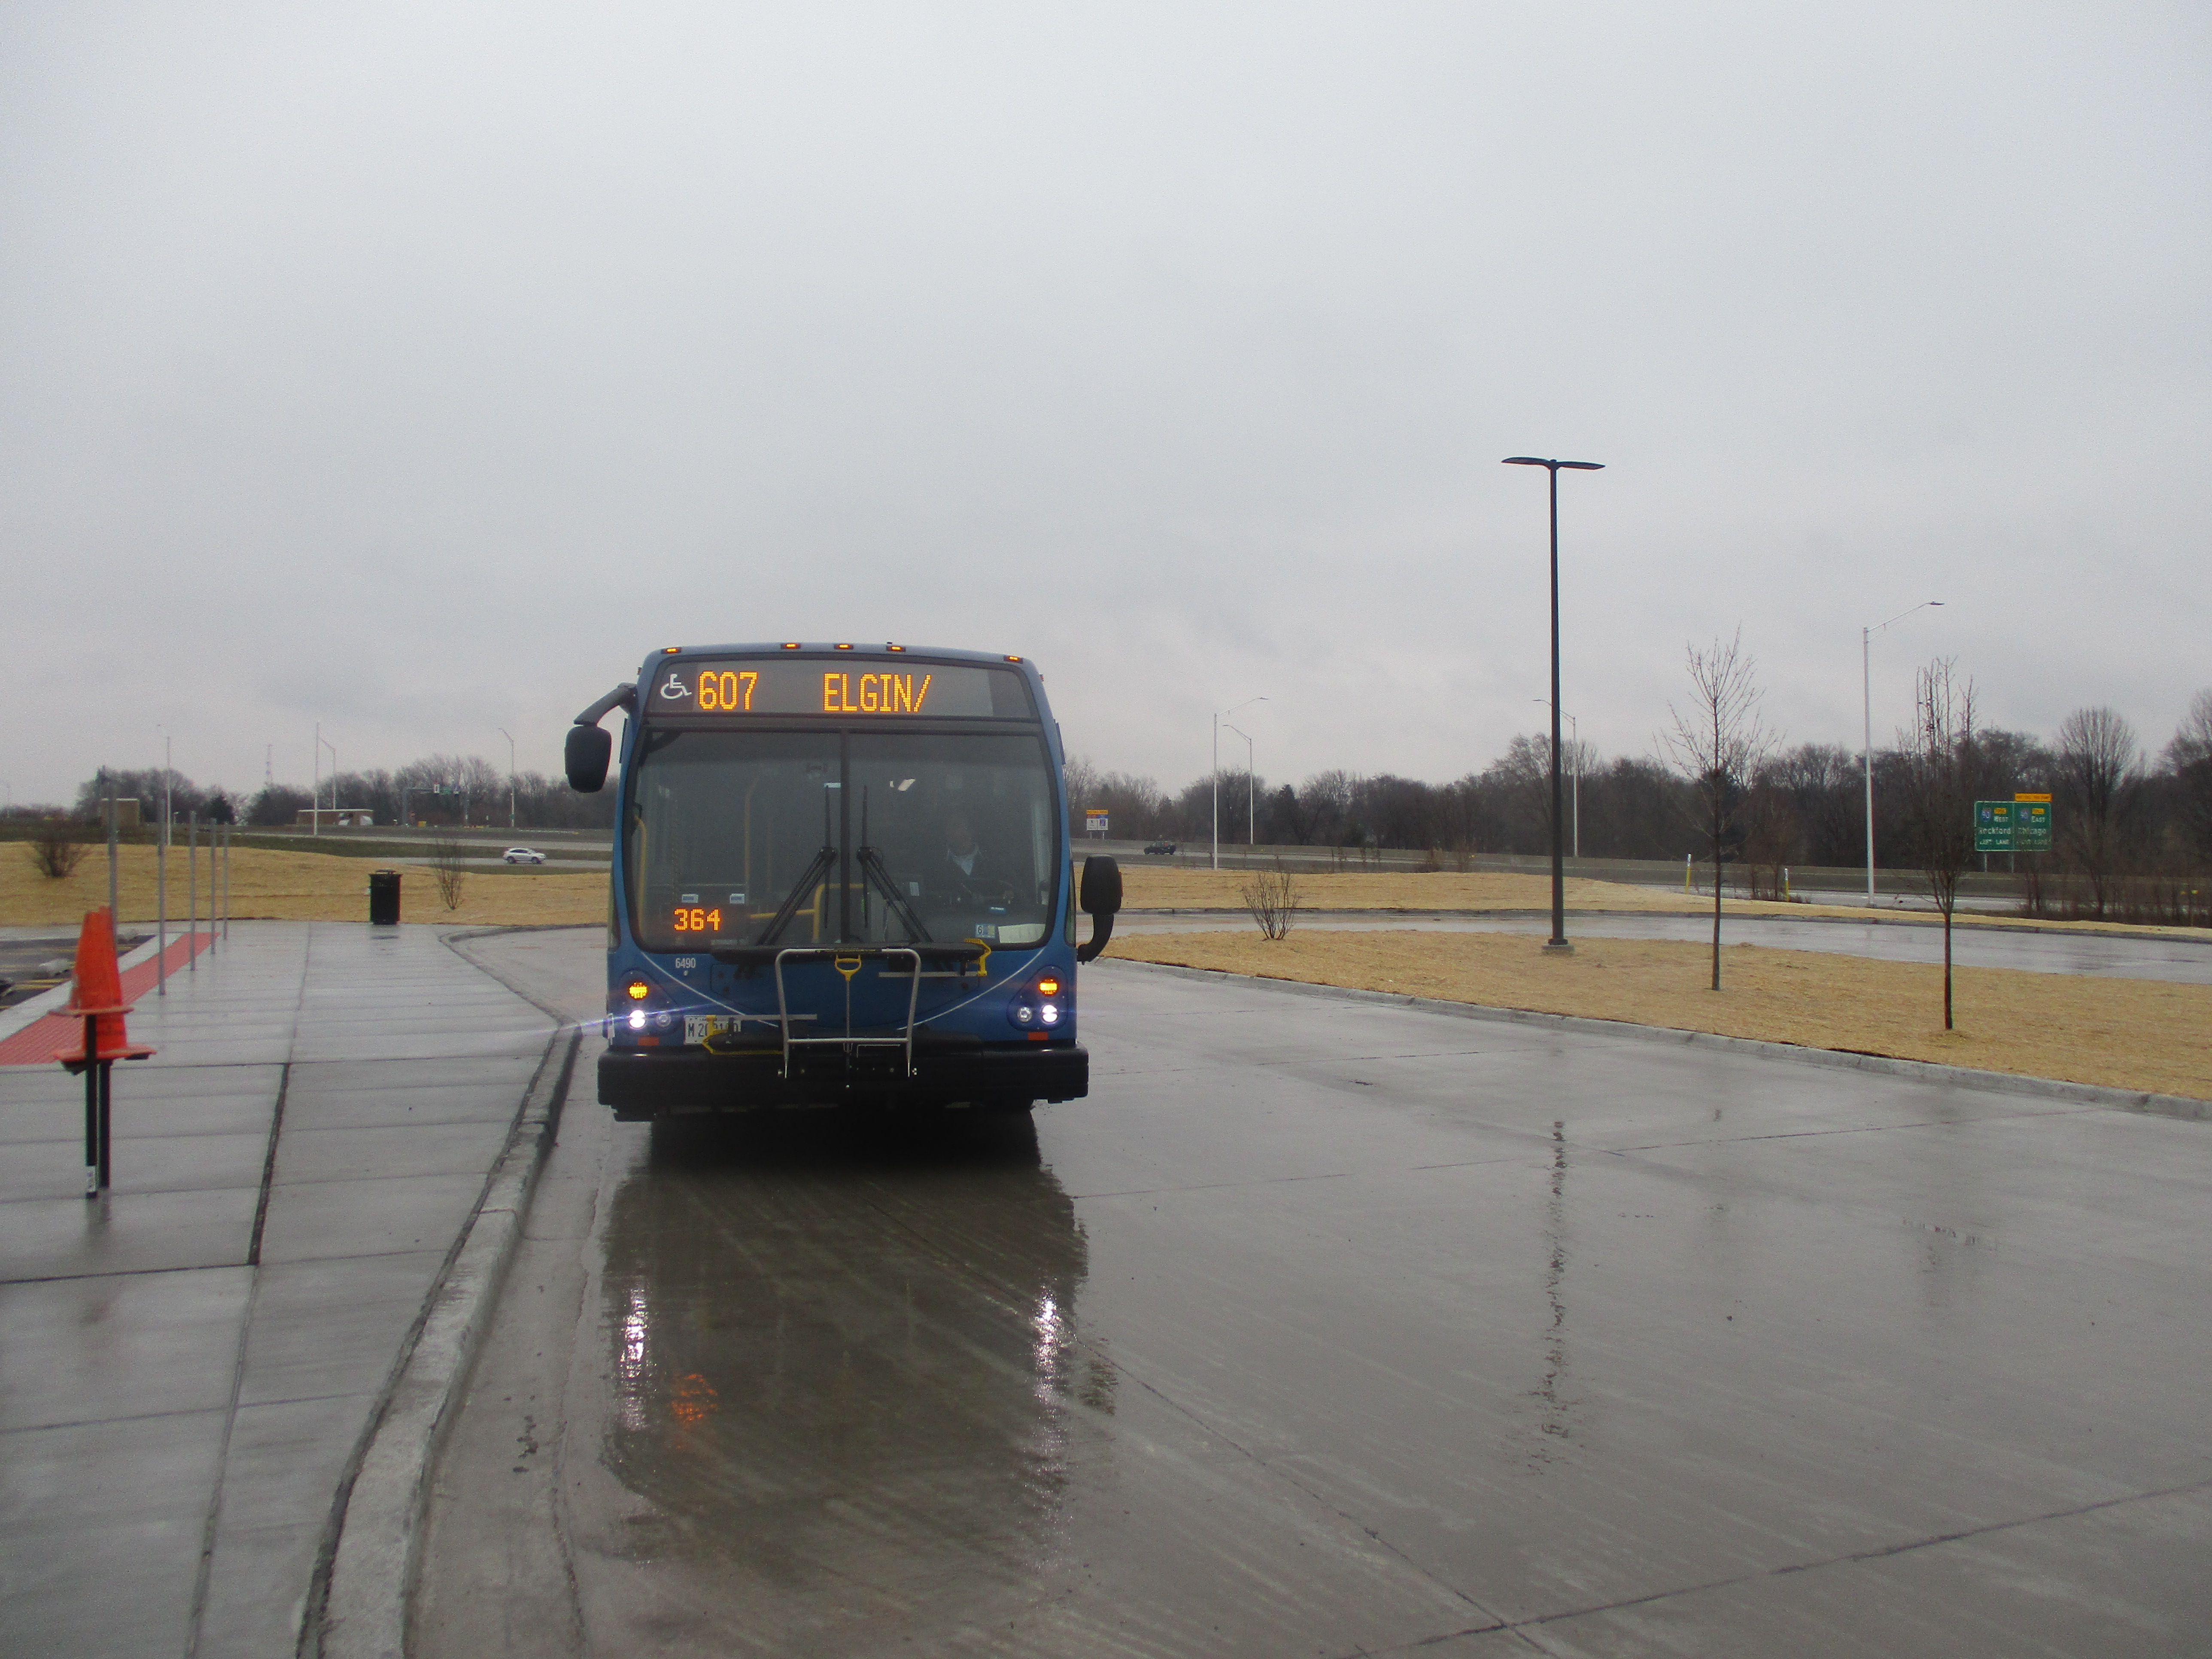 pace opens new park-n-ride station in elgin as ridership increases